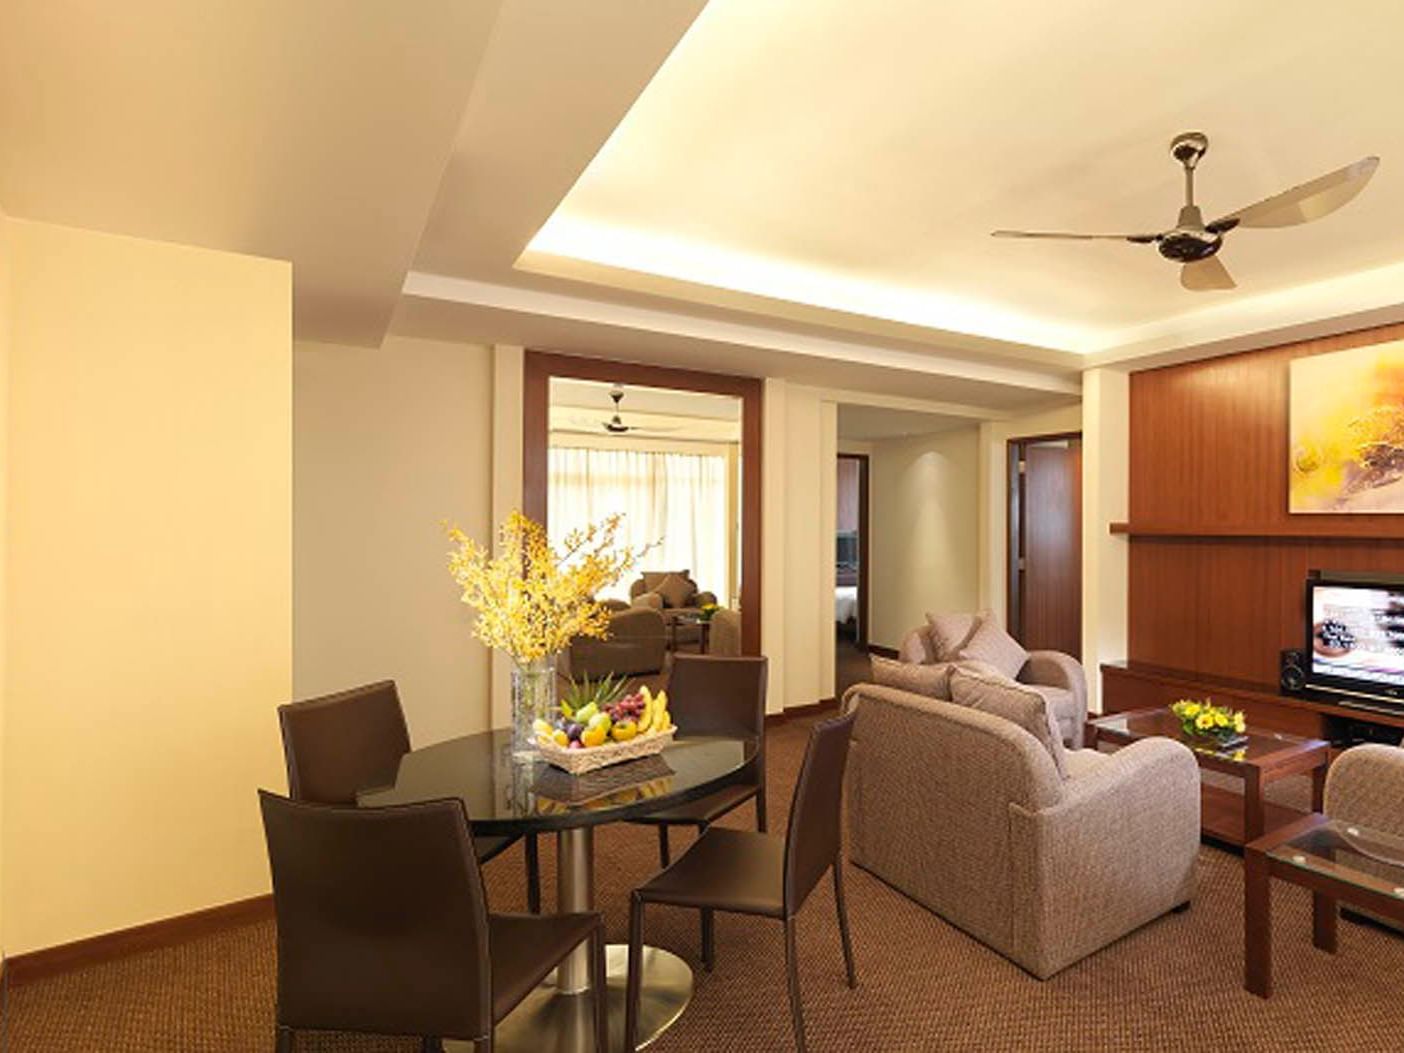 Living area of 2 Bedroom Apartment at Gardens hotel & residence